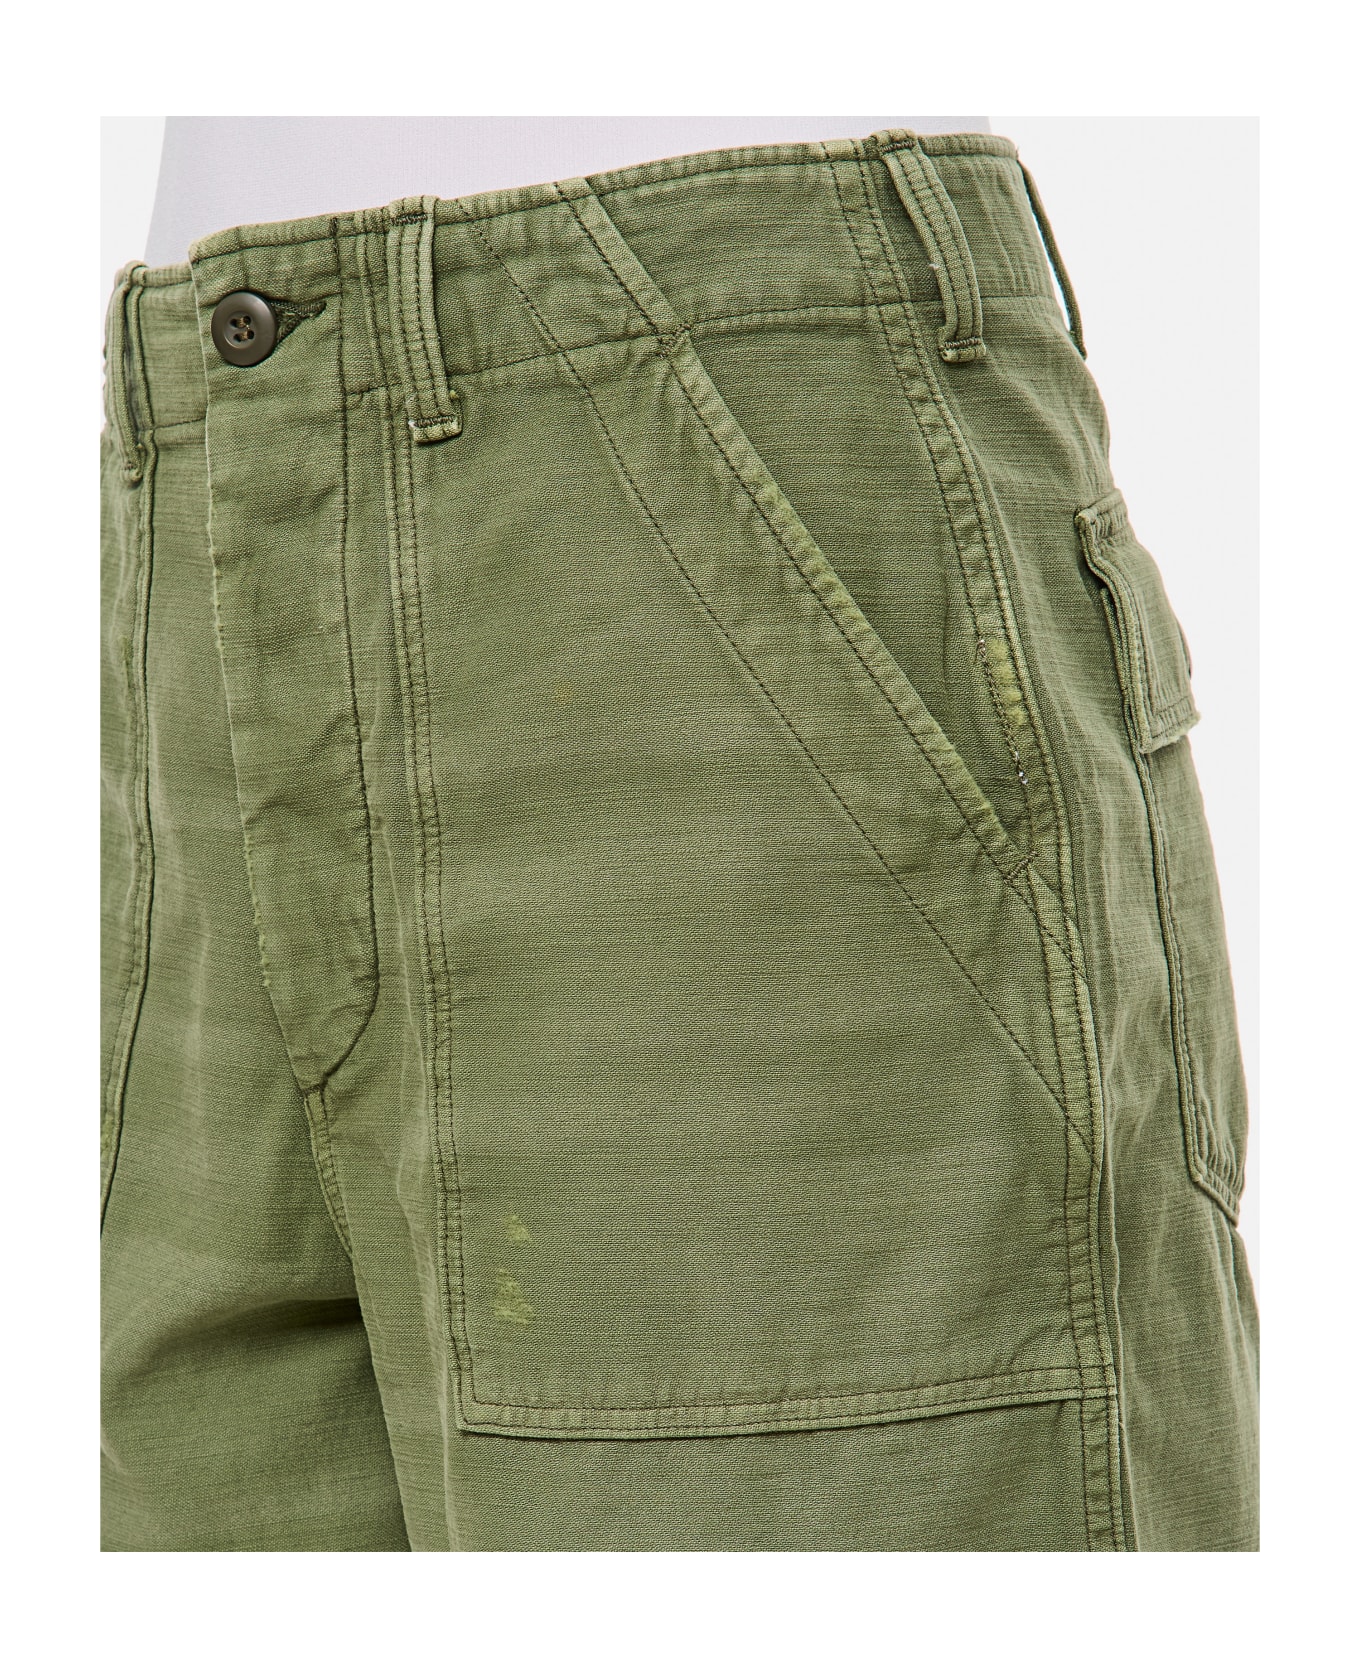 Polo Ralph Lauren Ricky Sht-n/a-flat Front - Olive